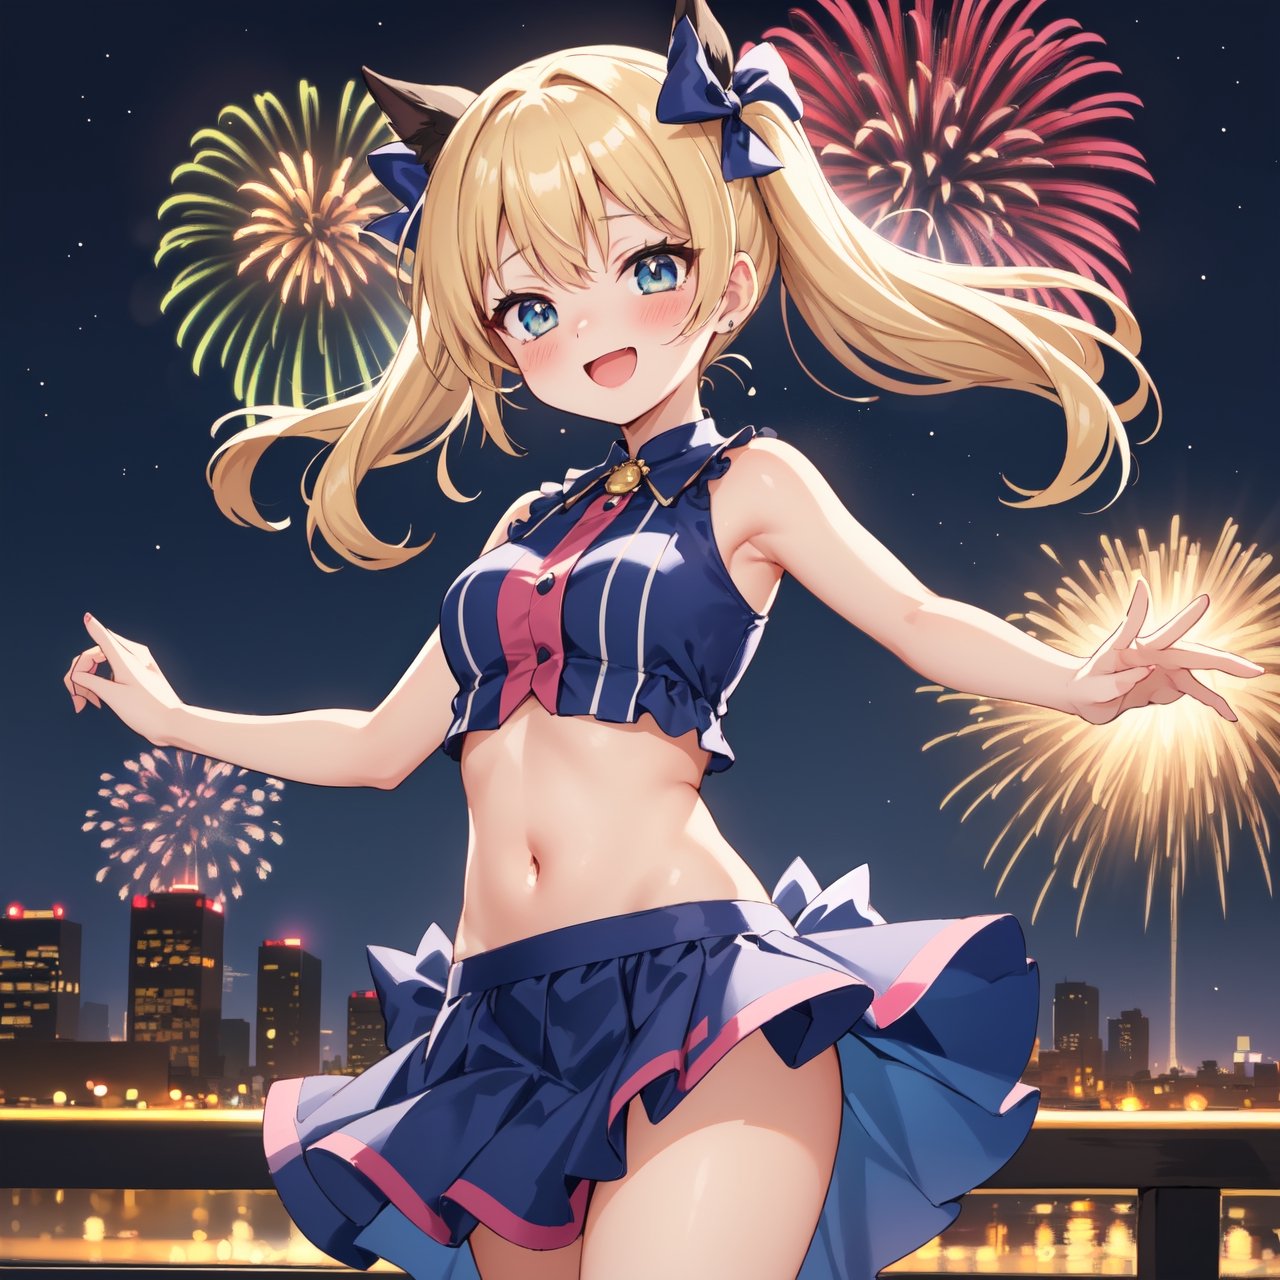 In a nighttime setting illuminated by dazzling fireworks, the modern anime girl beams with infectious happiness. Her tousled blonde hair cascades freely, a carefree contrast to the organized chaos of the night, reflecting her playful spirit. She sports an effortlessly stylish ensemble—a cute crop top paired with a flowing skirt, slightly tousled and giving off an air of spontaneity.

Her attire, though slightly disheveled from the excitement of the night, only adds to her charm. A charmingly messy hairdo is adorned with a cute, oversized hair bow that adds a touch of adorable fashion to her look. The vibrant colors of her outfit pop against the night sky, accentuating her joyful demeanor.

Gone is the previous hint of solitude; now, her expression radiates pure happiness, cheeks tinged with a rosy blush from the exhilaration of the moment. Her eyes sparkle with delight as she revels in the beauty of the fireworks, their colorful bursts painting the sky behind her in a mesmerizing display.

Amidst the night's chaos, she stands confidently, embracing the lively atmosphere with open arms. The cityscape twinkles around her, but her focus remains on the captivating display above, the sheer joy evident in her infectious smile. This modern girl embodies vivacity and carefree happiness, capturing the essence of a celebratory night filled with excitement and newfound happiness.